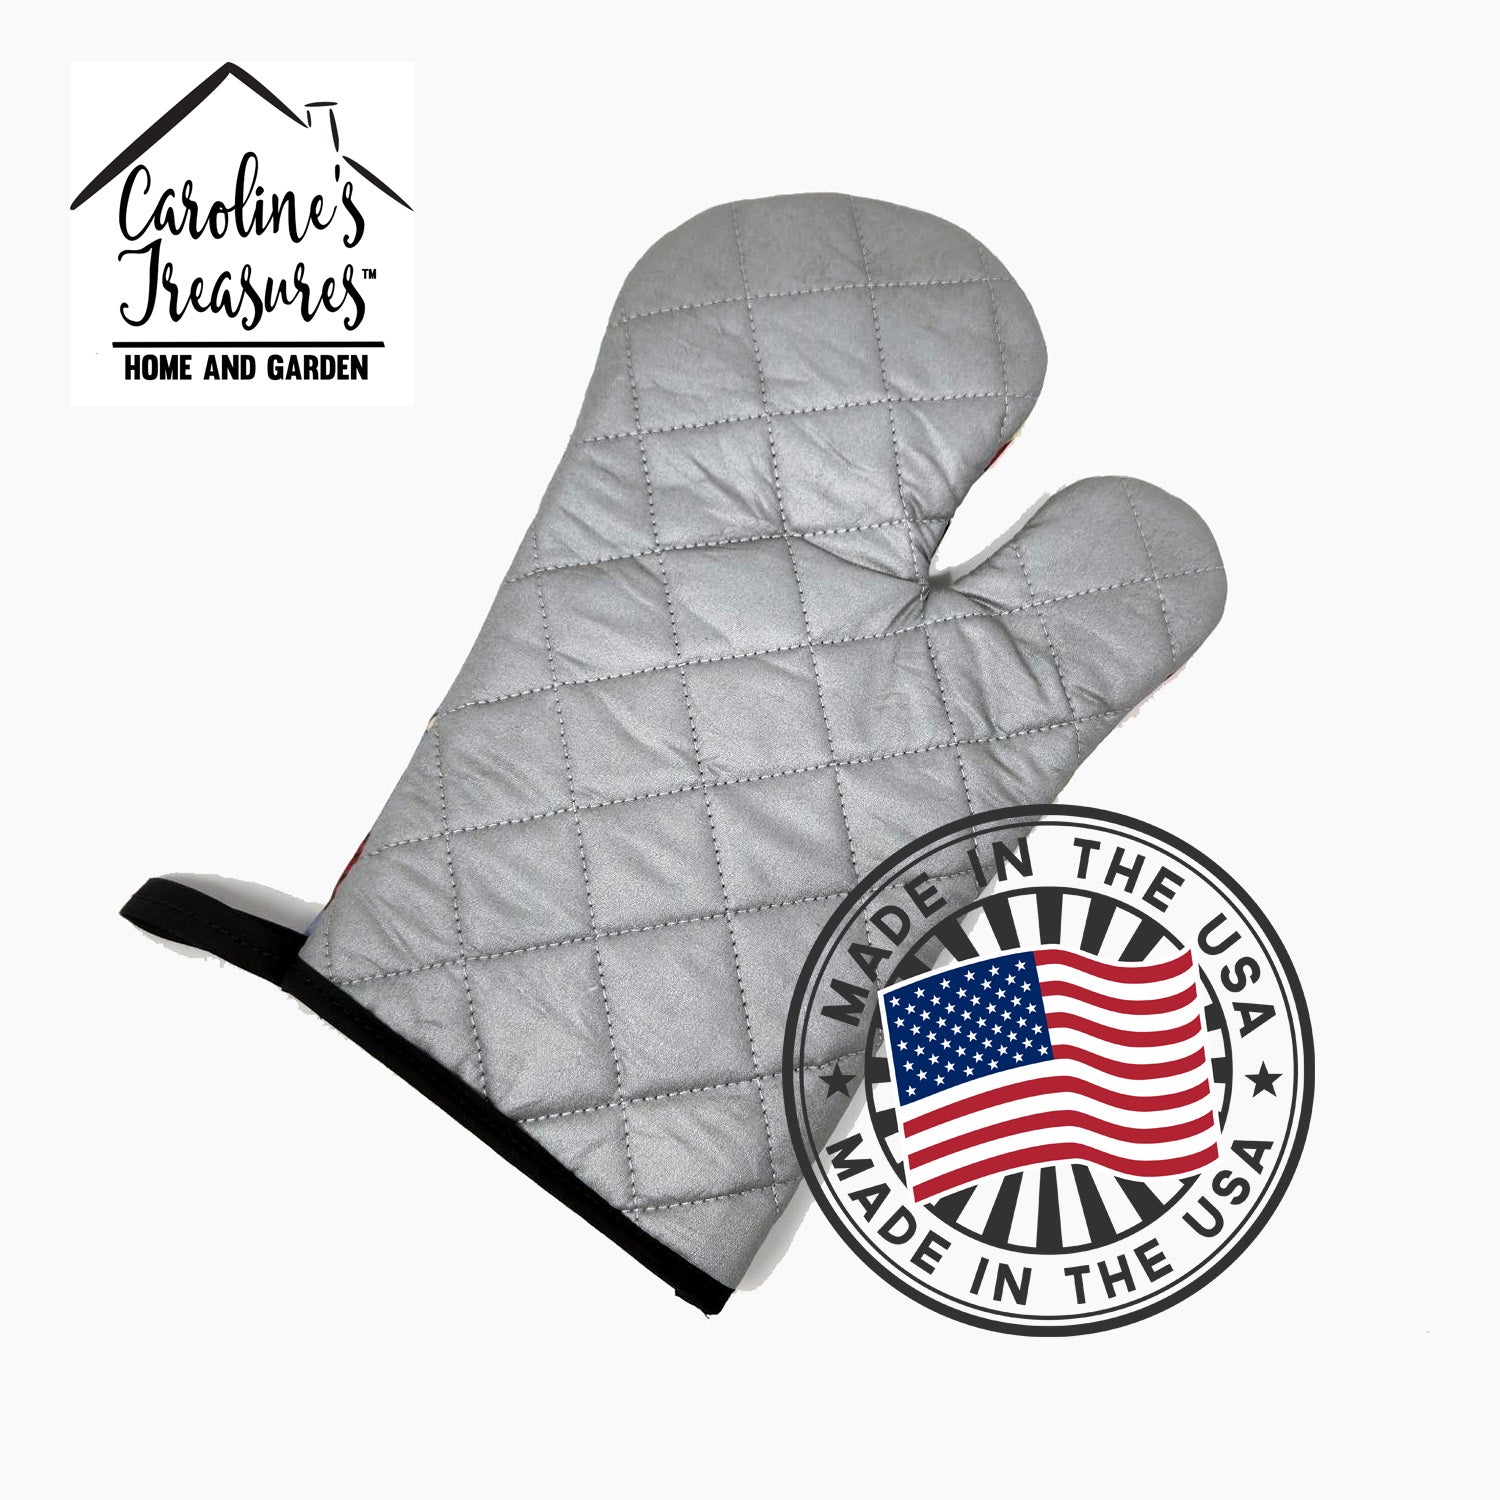 Christmas French Bulldog Brindle Oven Mitt BB4669OVMT  the-store.com.